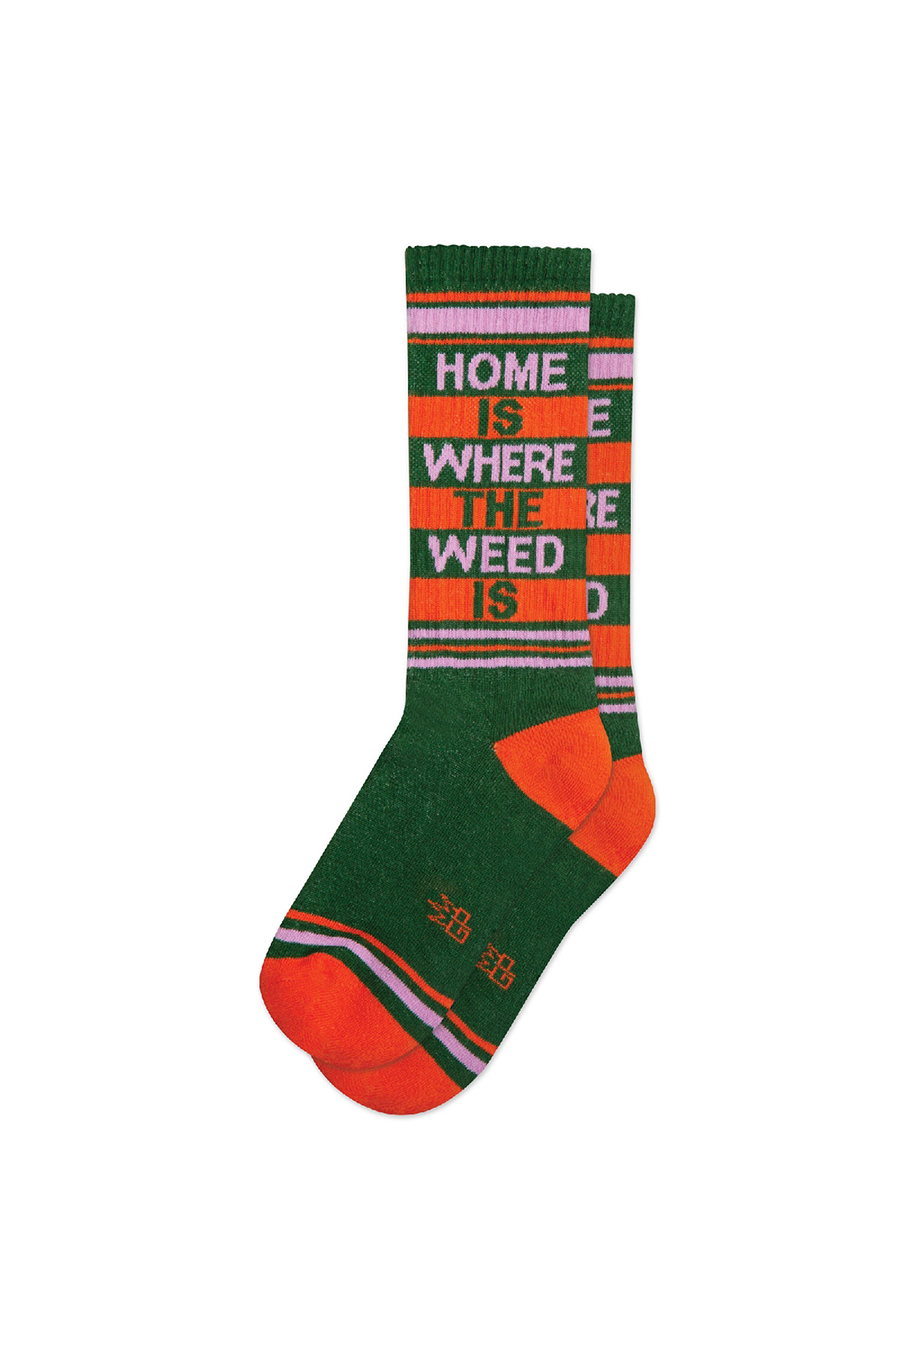 Home Is Where Weed Ribbed Sock - Main Image Number 1 of 2